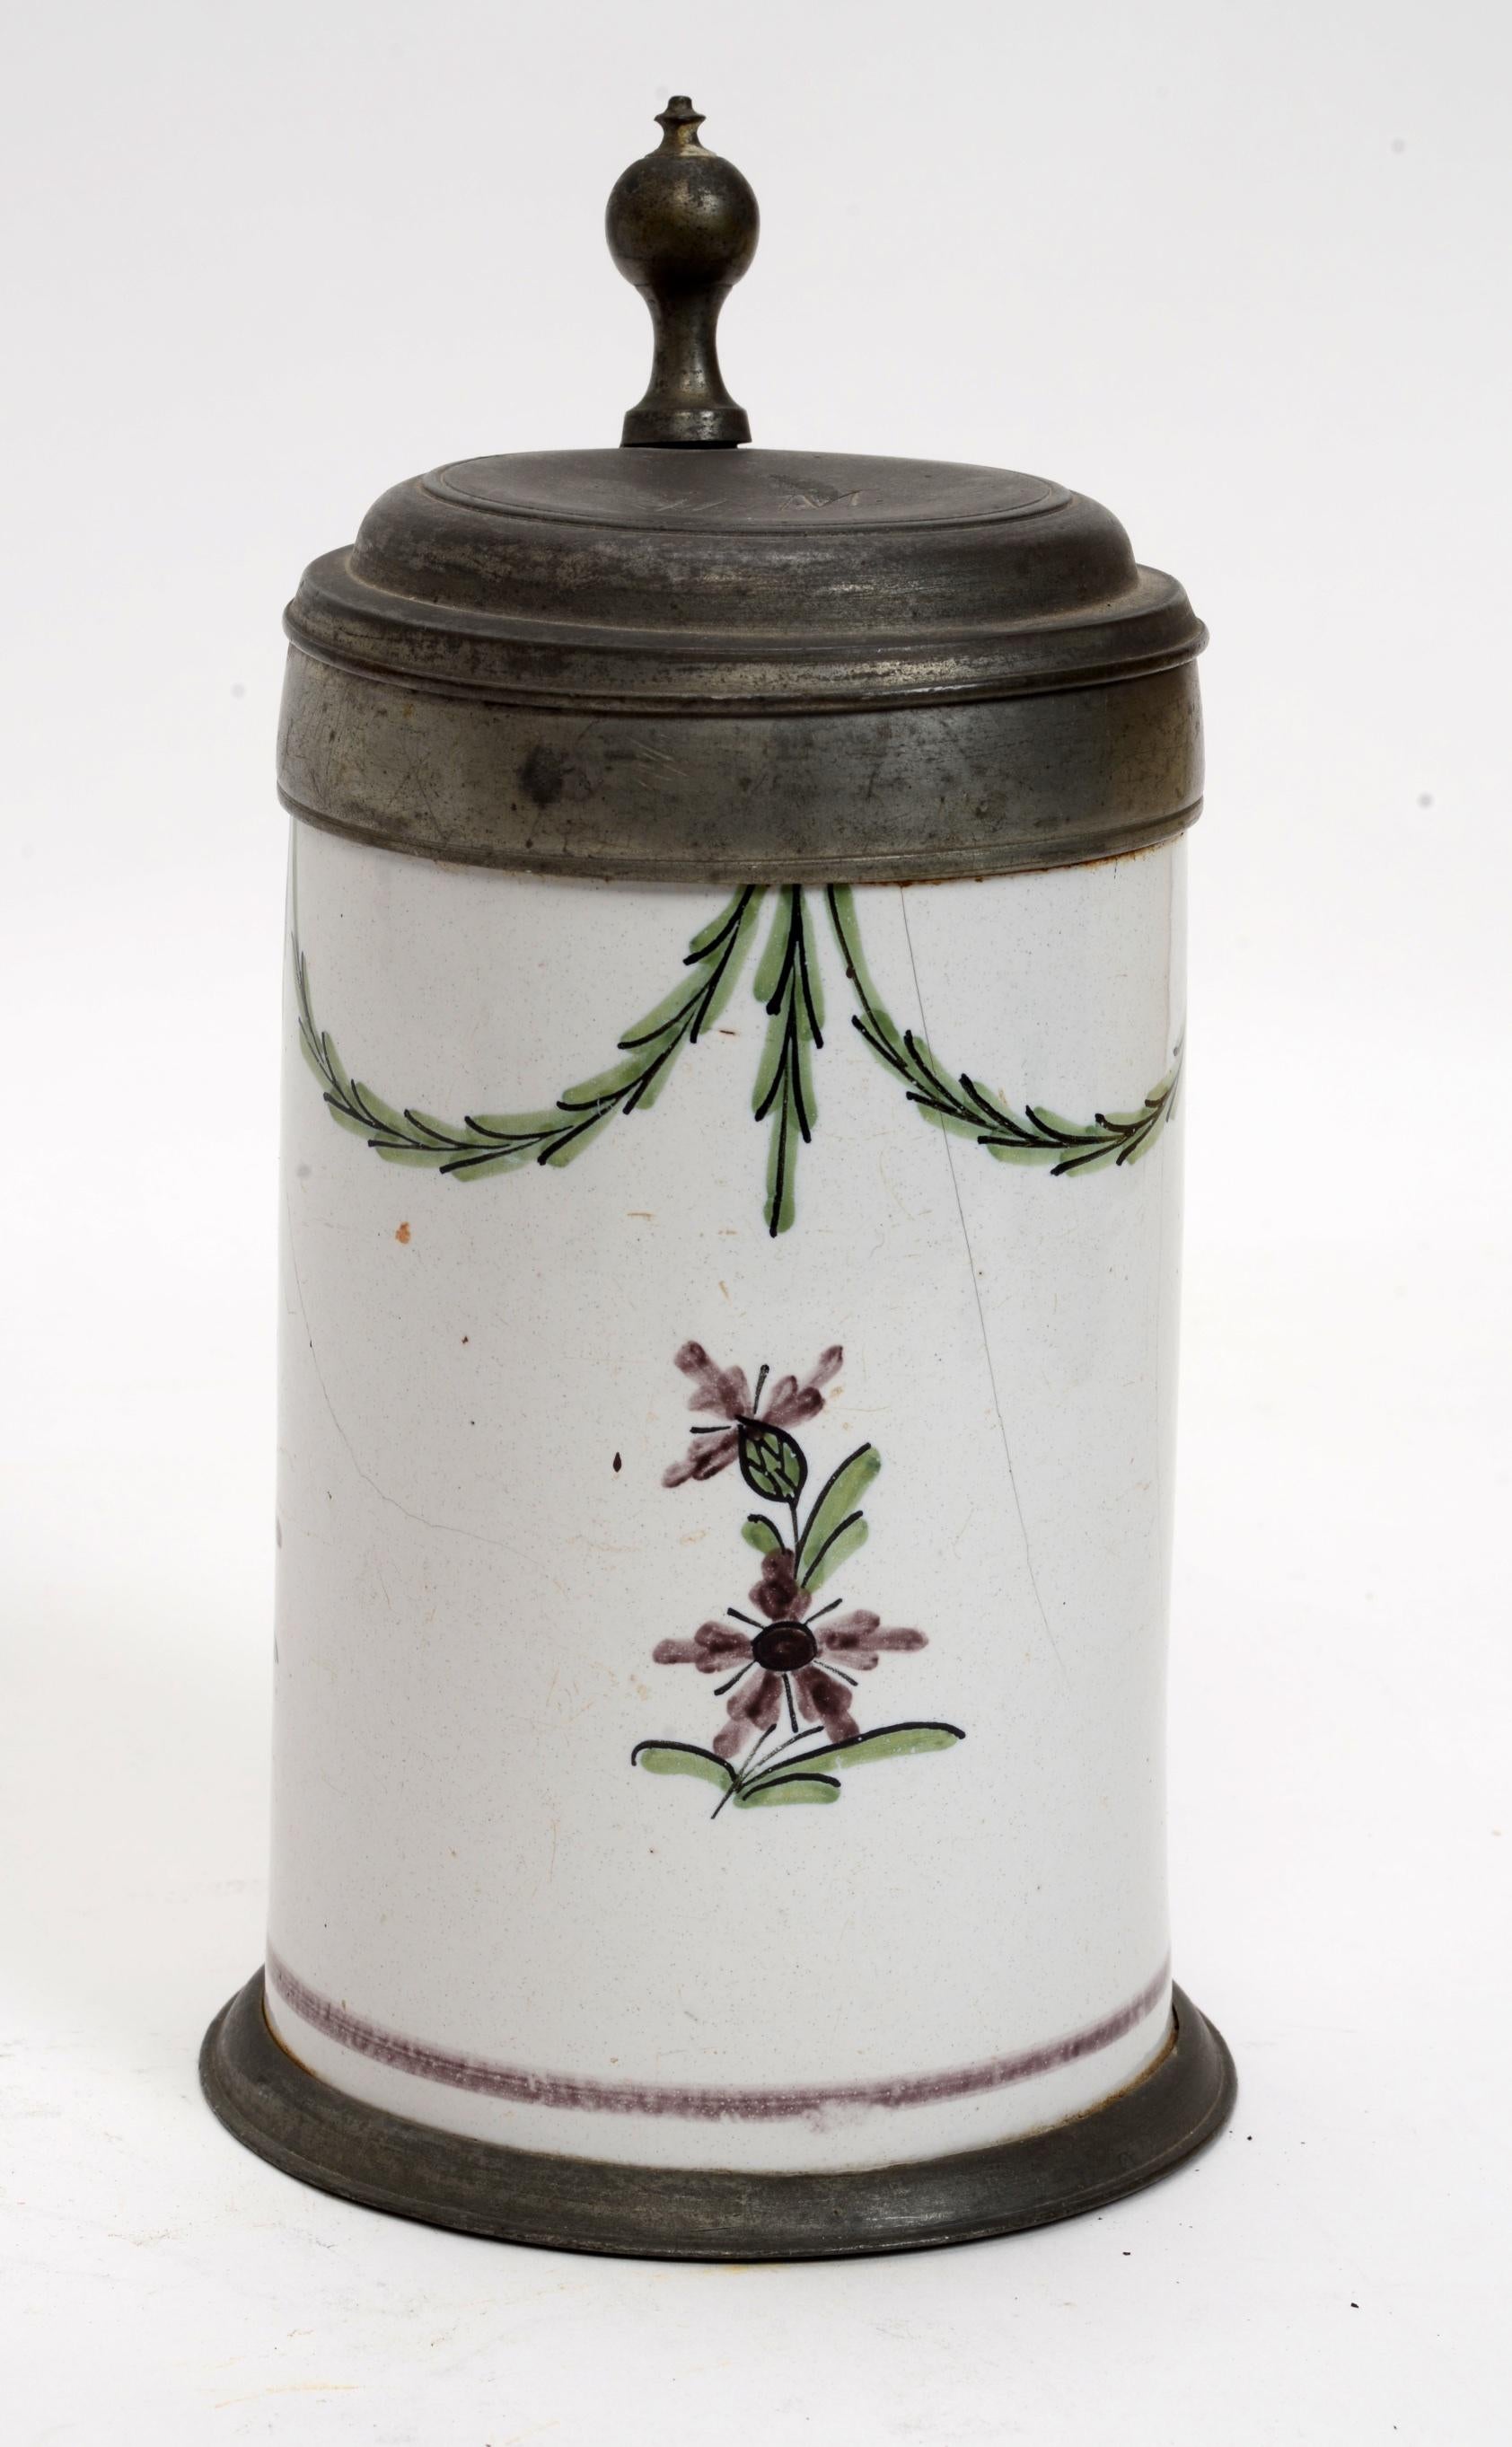 Hand-Painted 18th Century German Pewter Mounted Faience Stein Initialed 